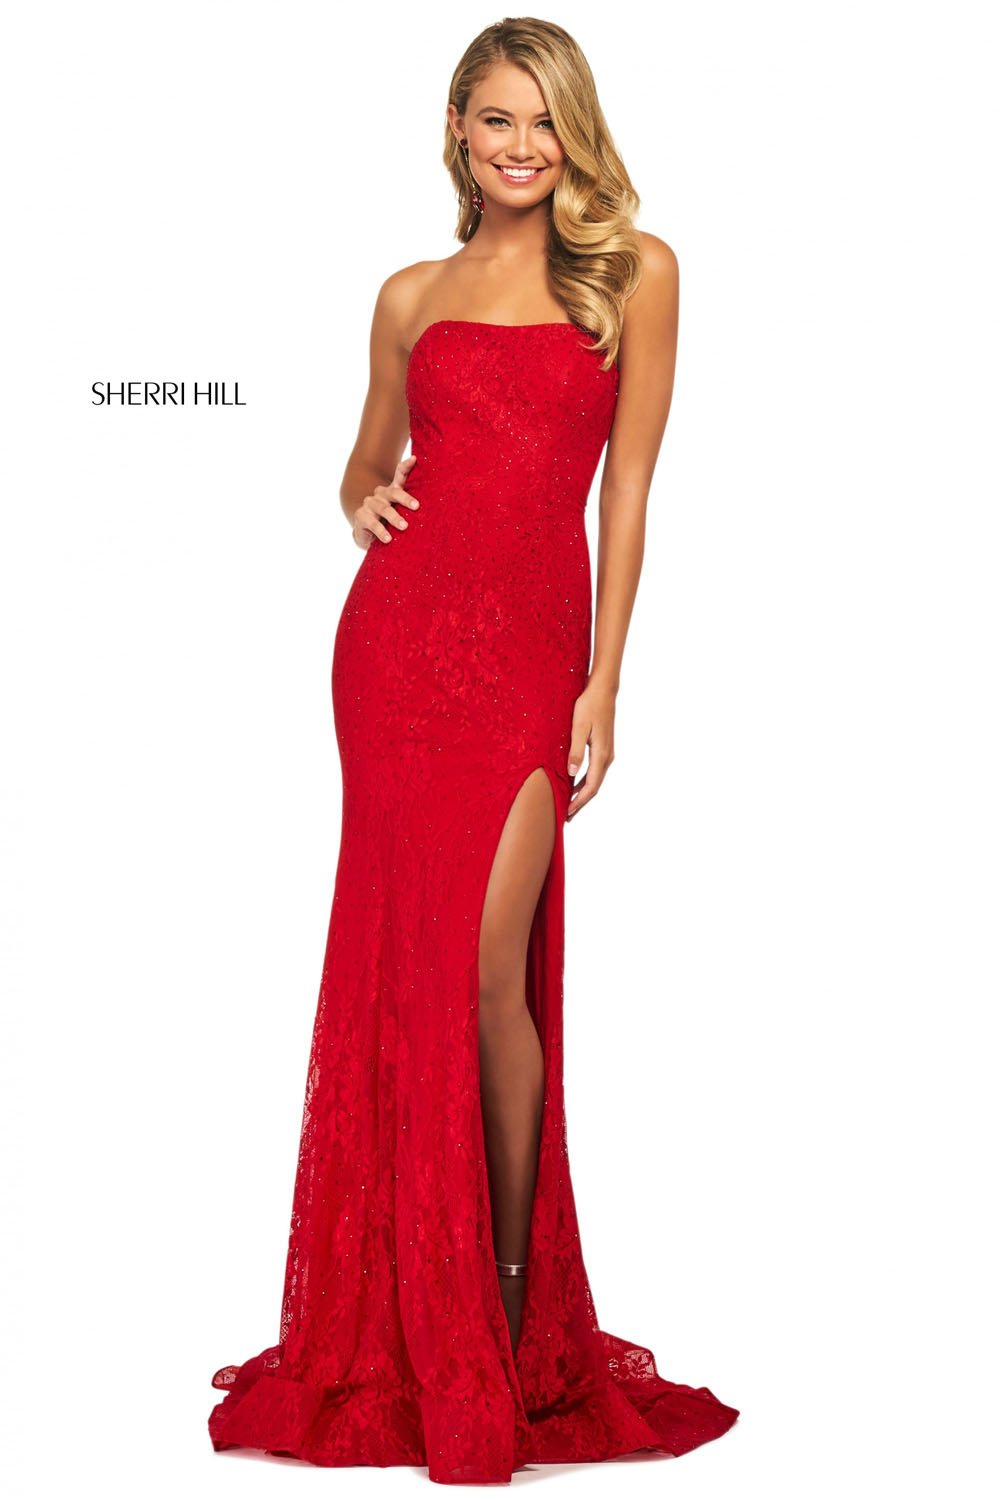 Sherri Hill 53681 dress images in these colors: Red, Navy, Black, Ivory, Pink, Aqua.